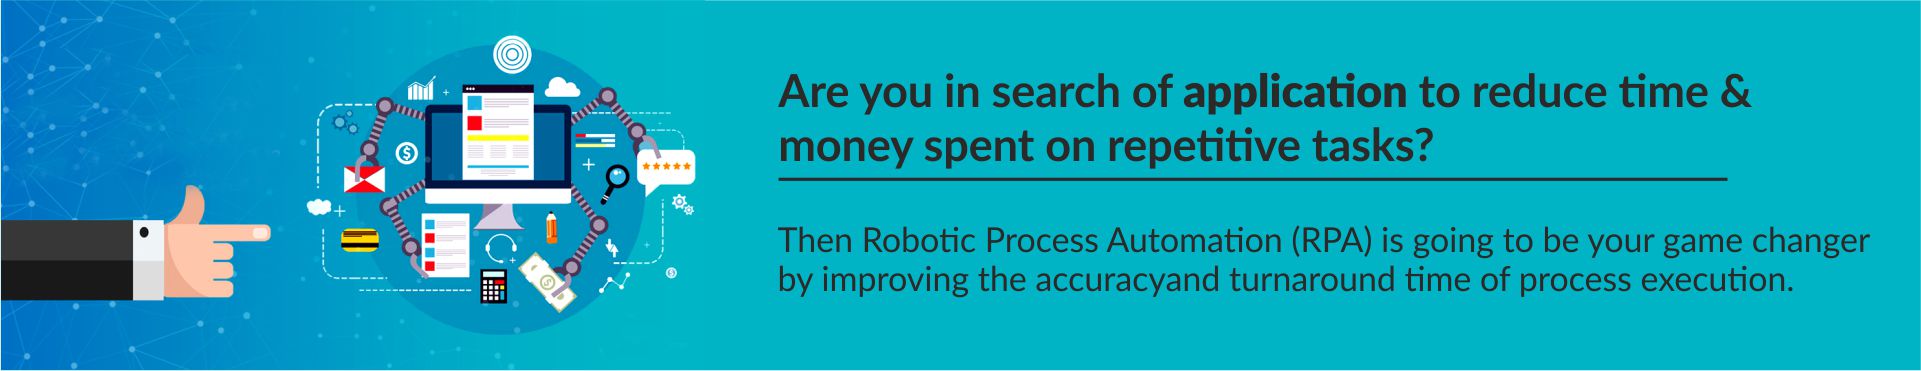 Zigna Analytics, Robotic Process Automation Consulting Services, RPA Solutions, Robotic Process Automation.